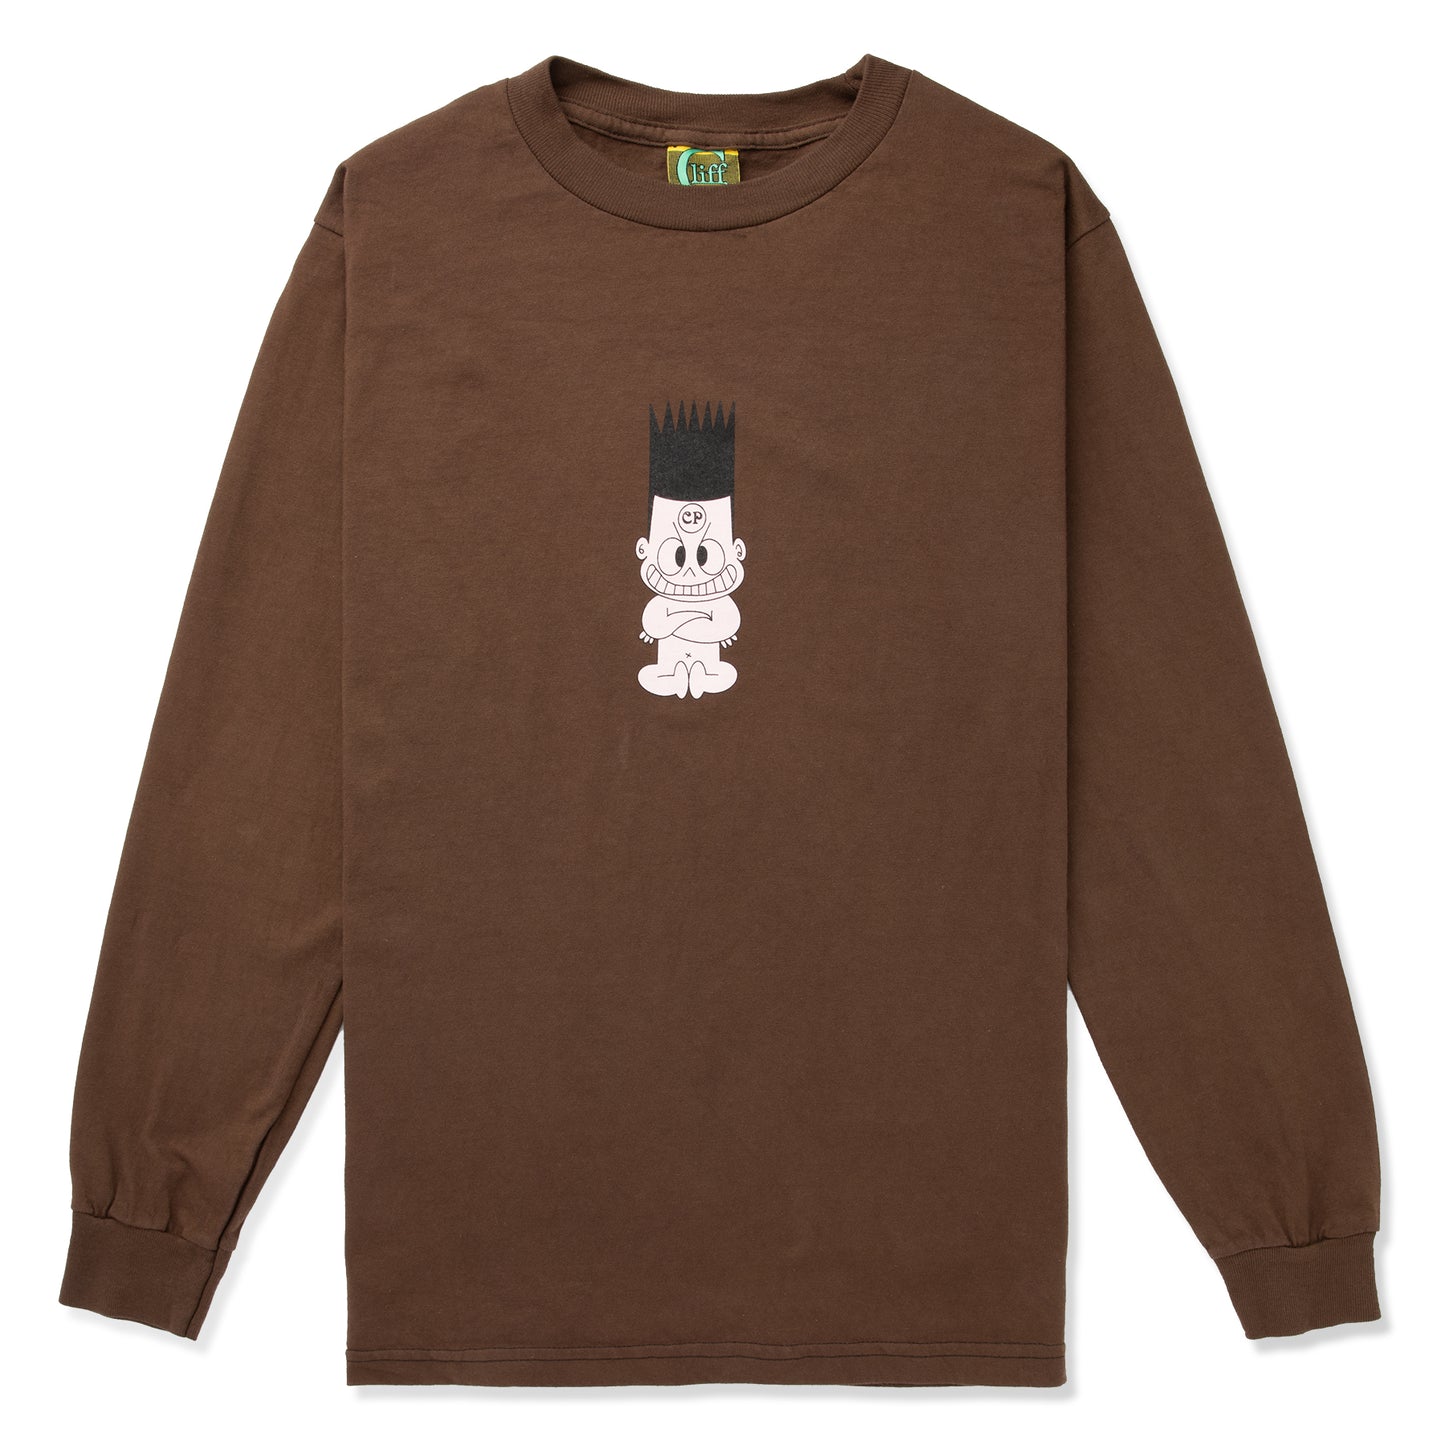 Cliff Problem Child Long Sleeve Shirt (Downtown Brown)